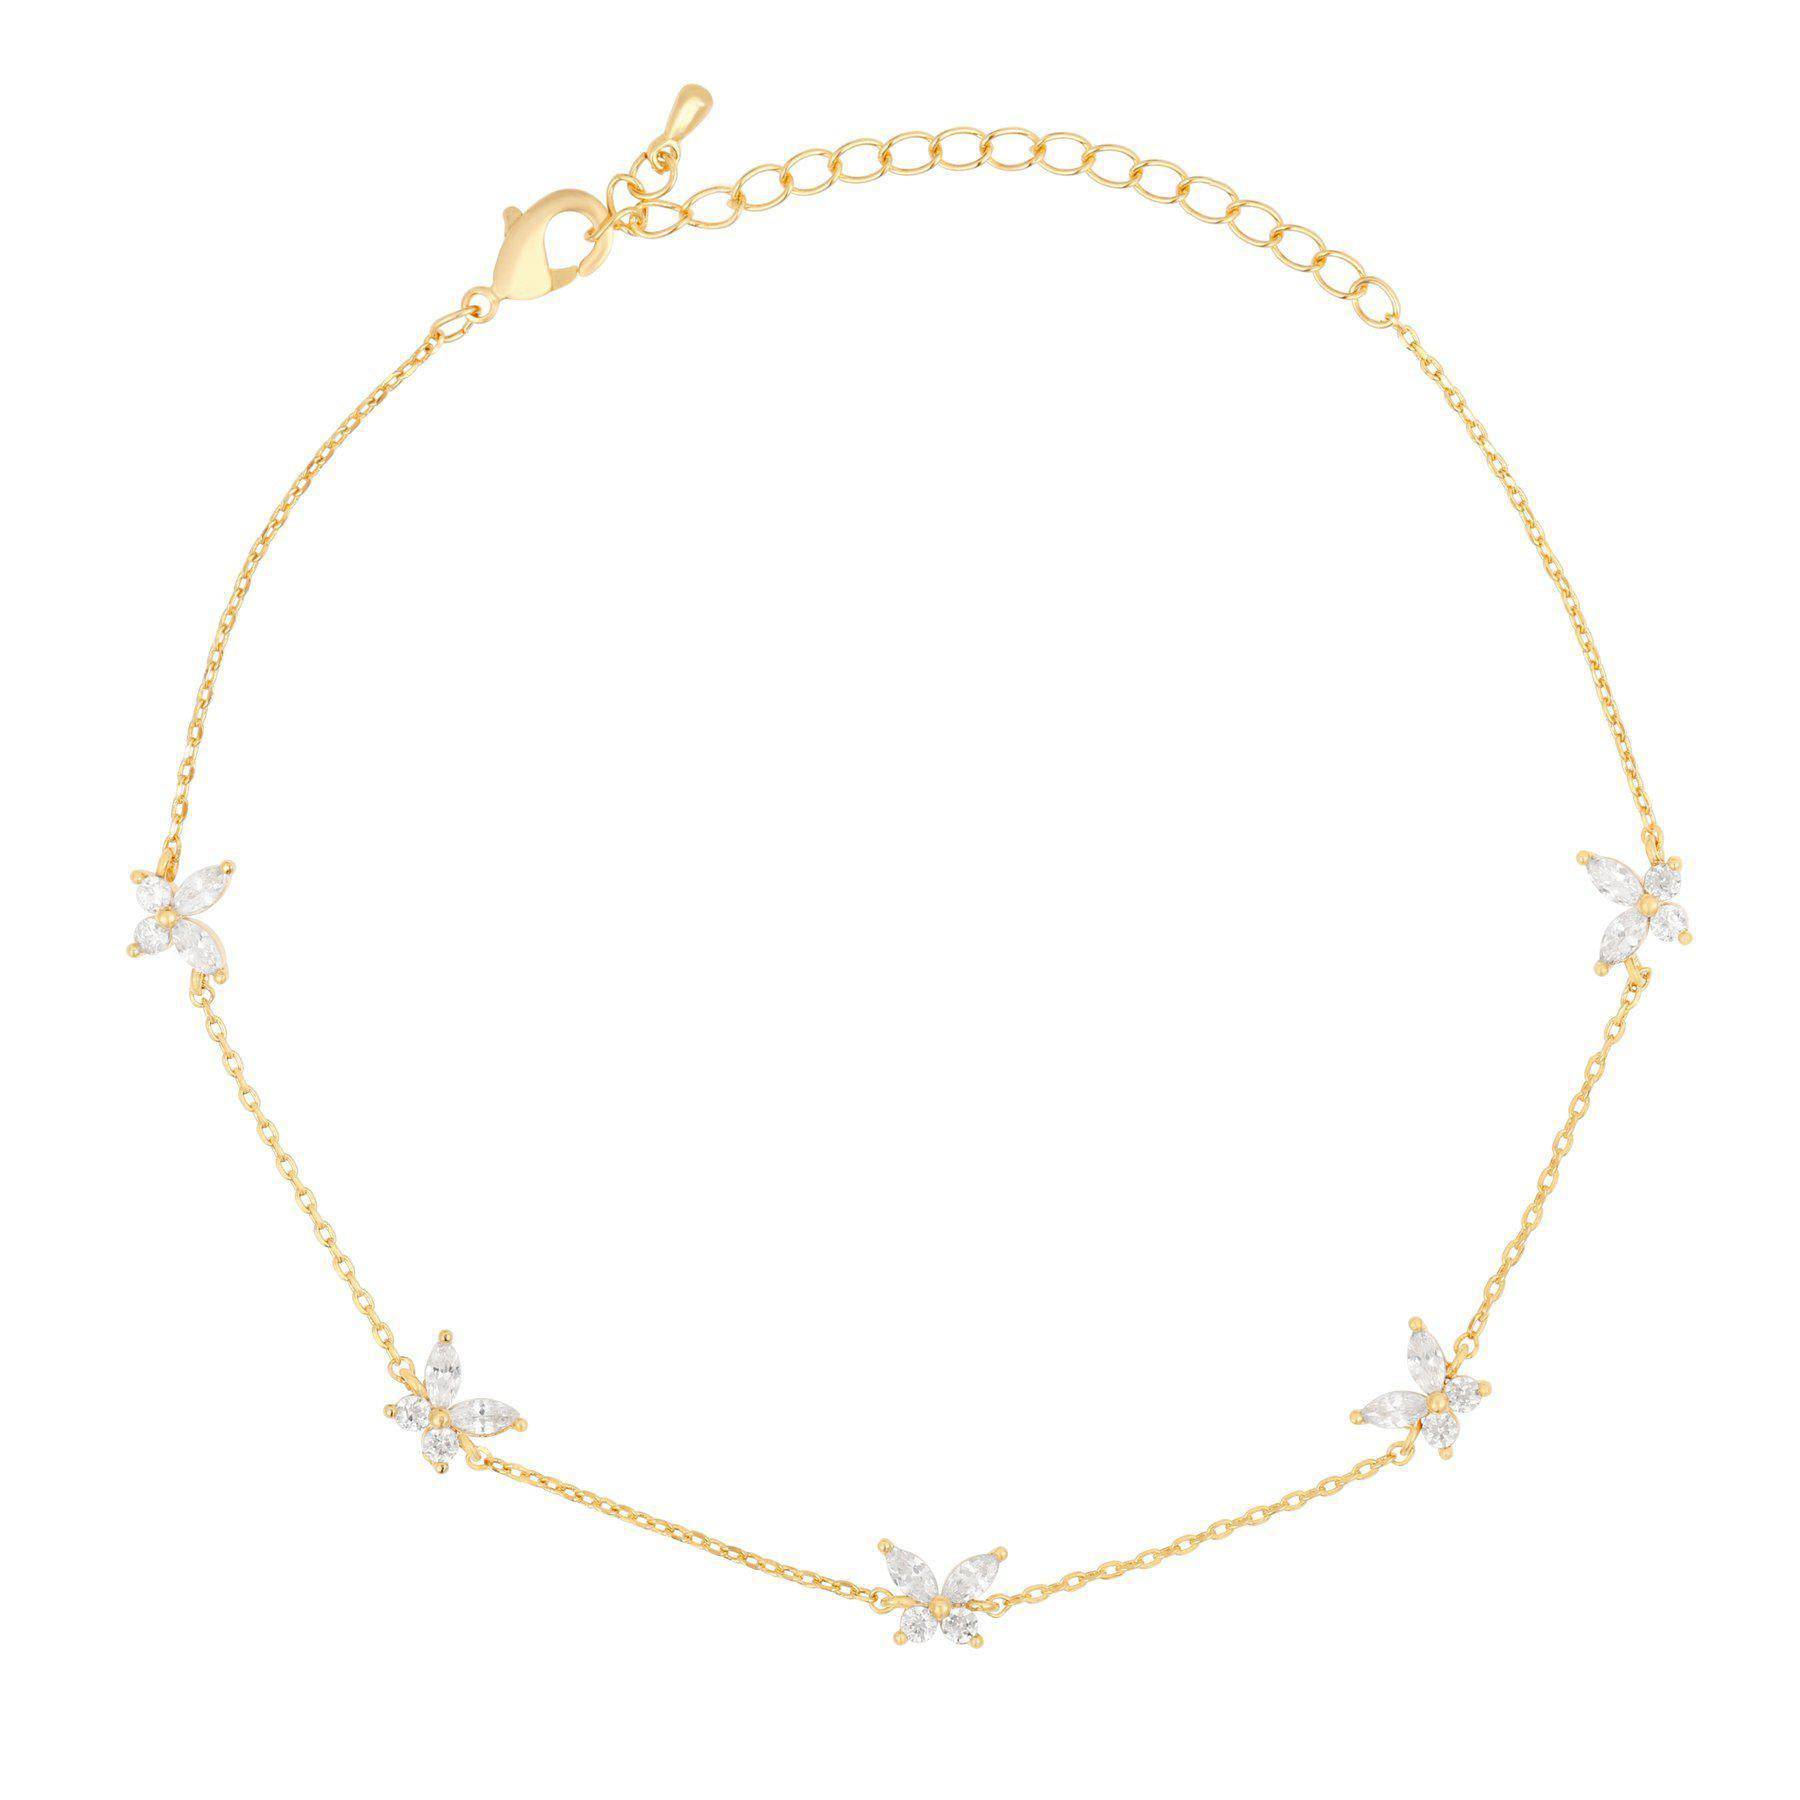 Born to Fly Anklet - Gold - Twinkle Twinkle Little One